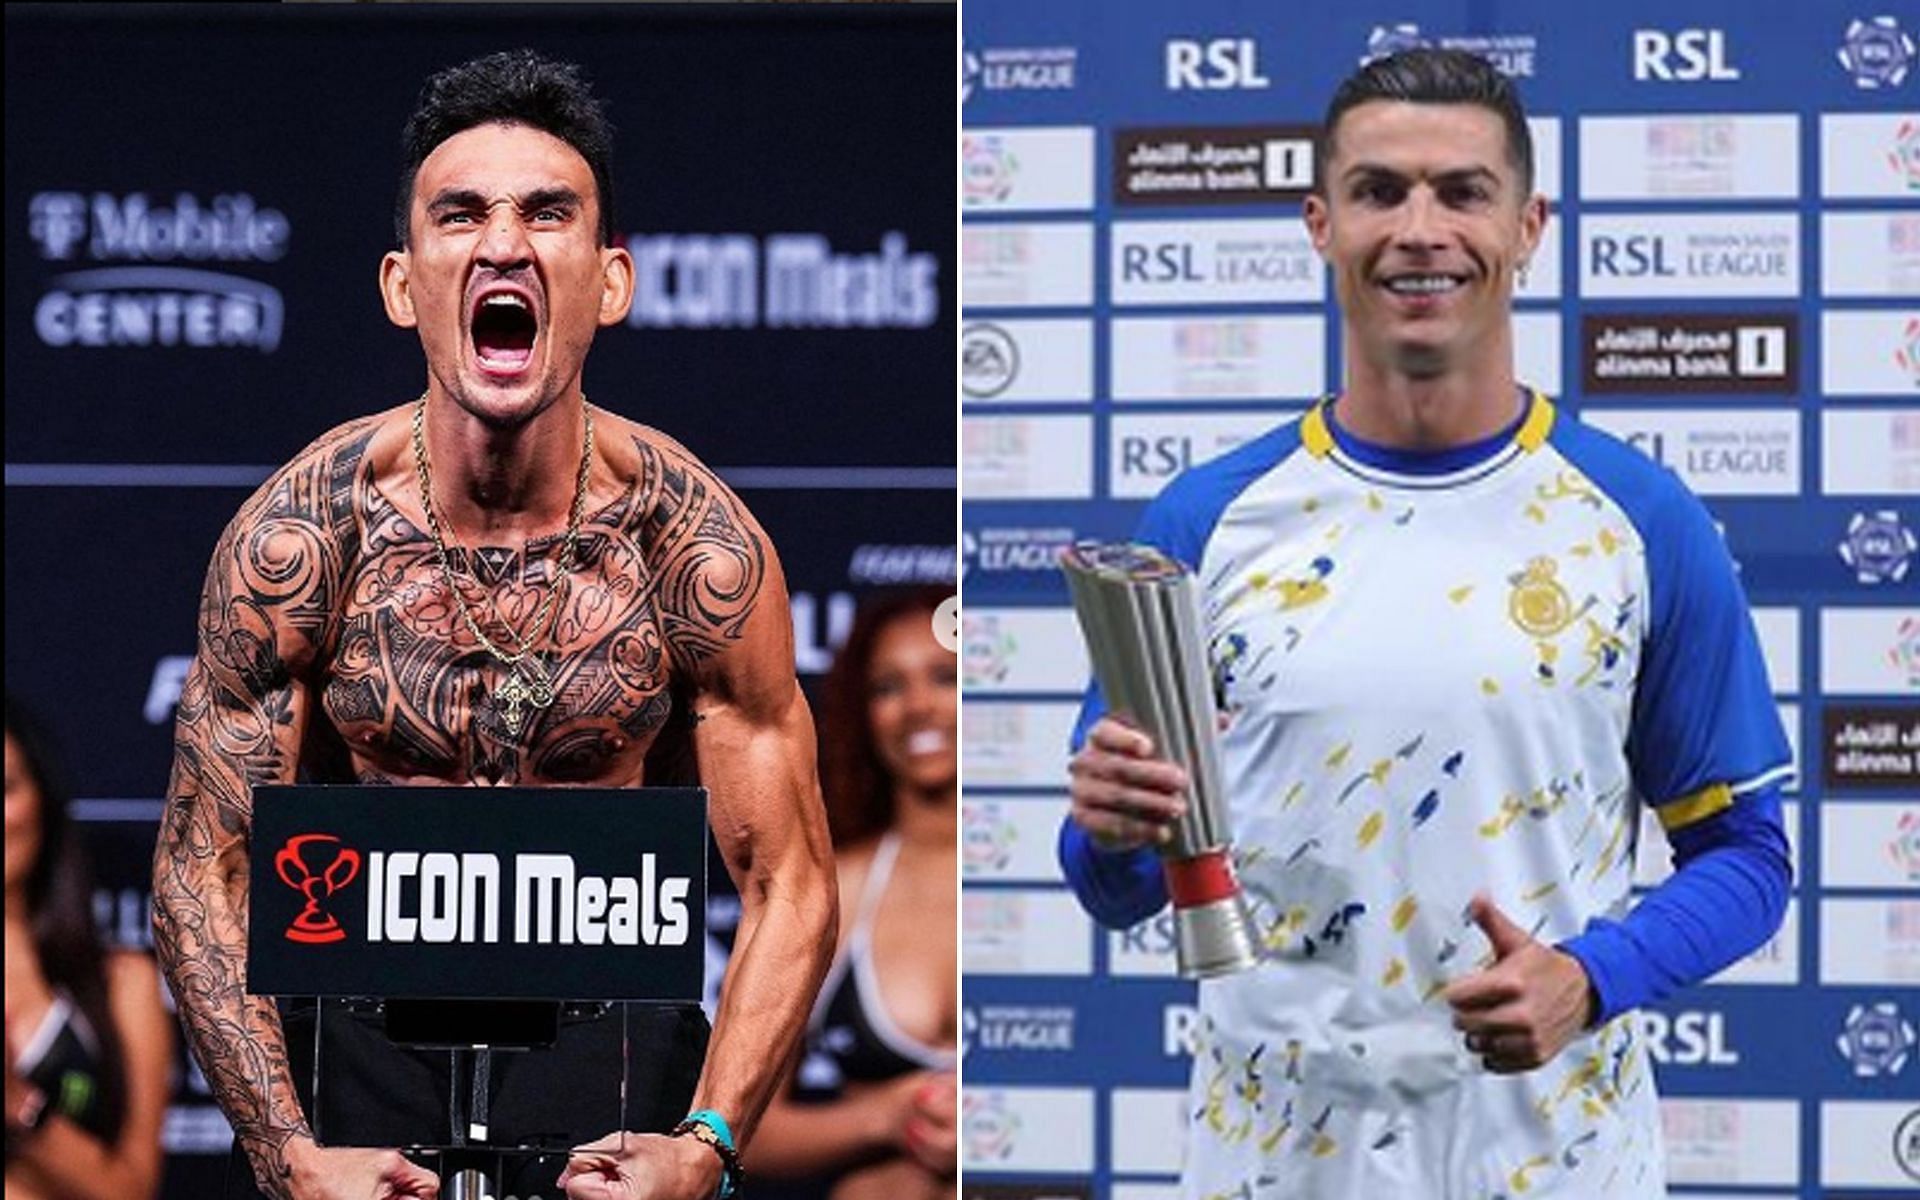 Max Holloway (L) and Christiano Ronaldo (R) Images via @blessedmma and @cristiano Instagram